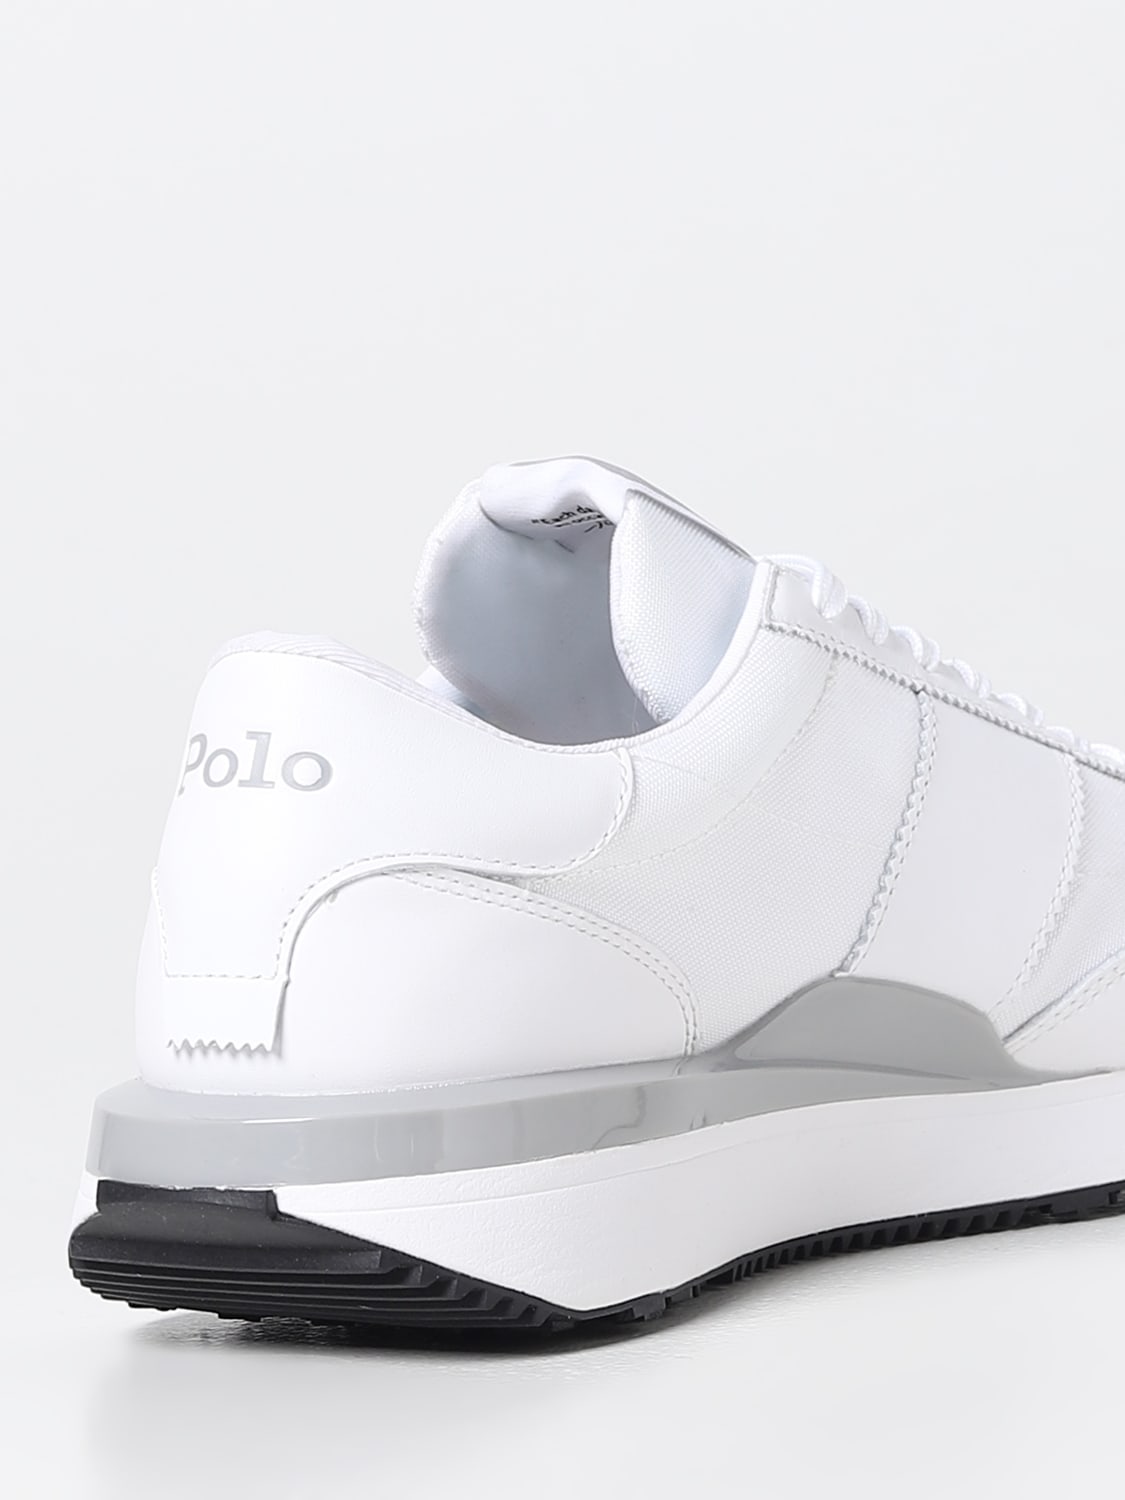 POLO RALPH sneakers for man - White | Polo Ralph Lauren sneakers online at GIGLIO.COM